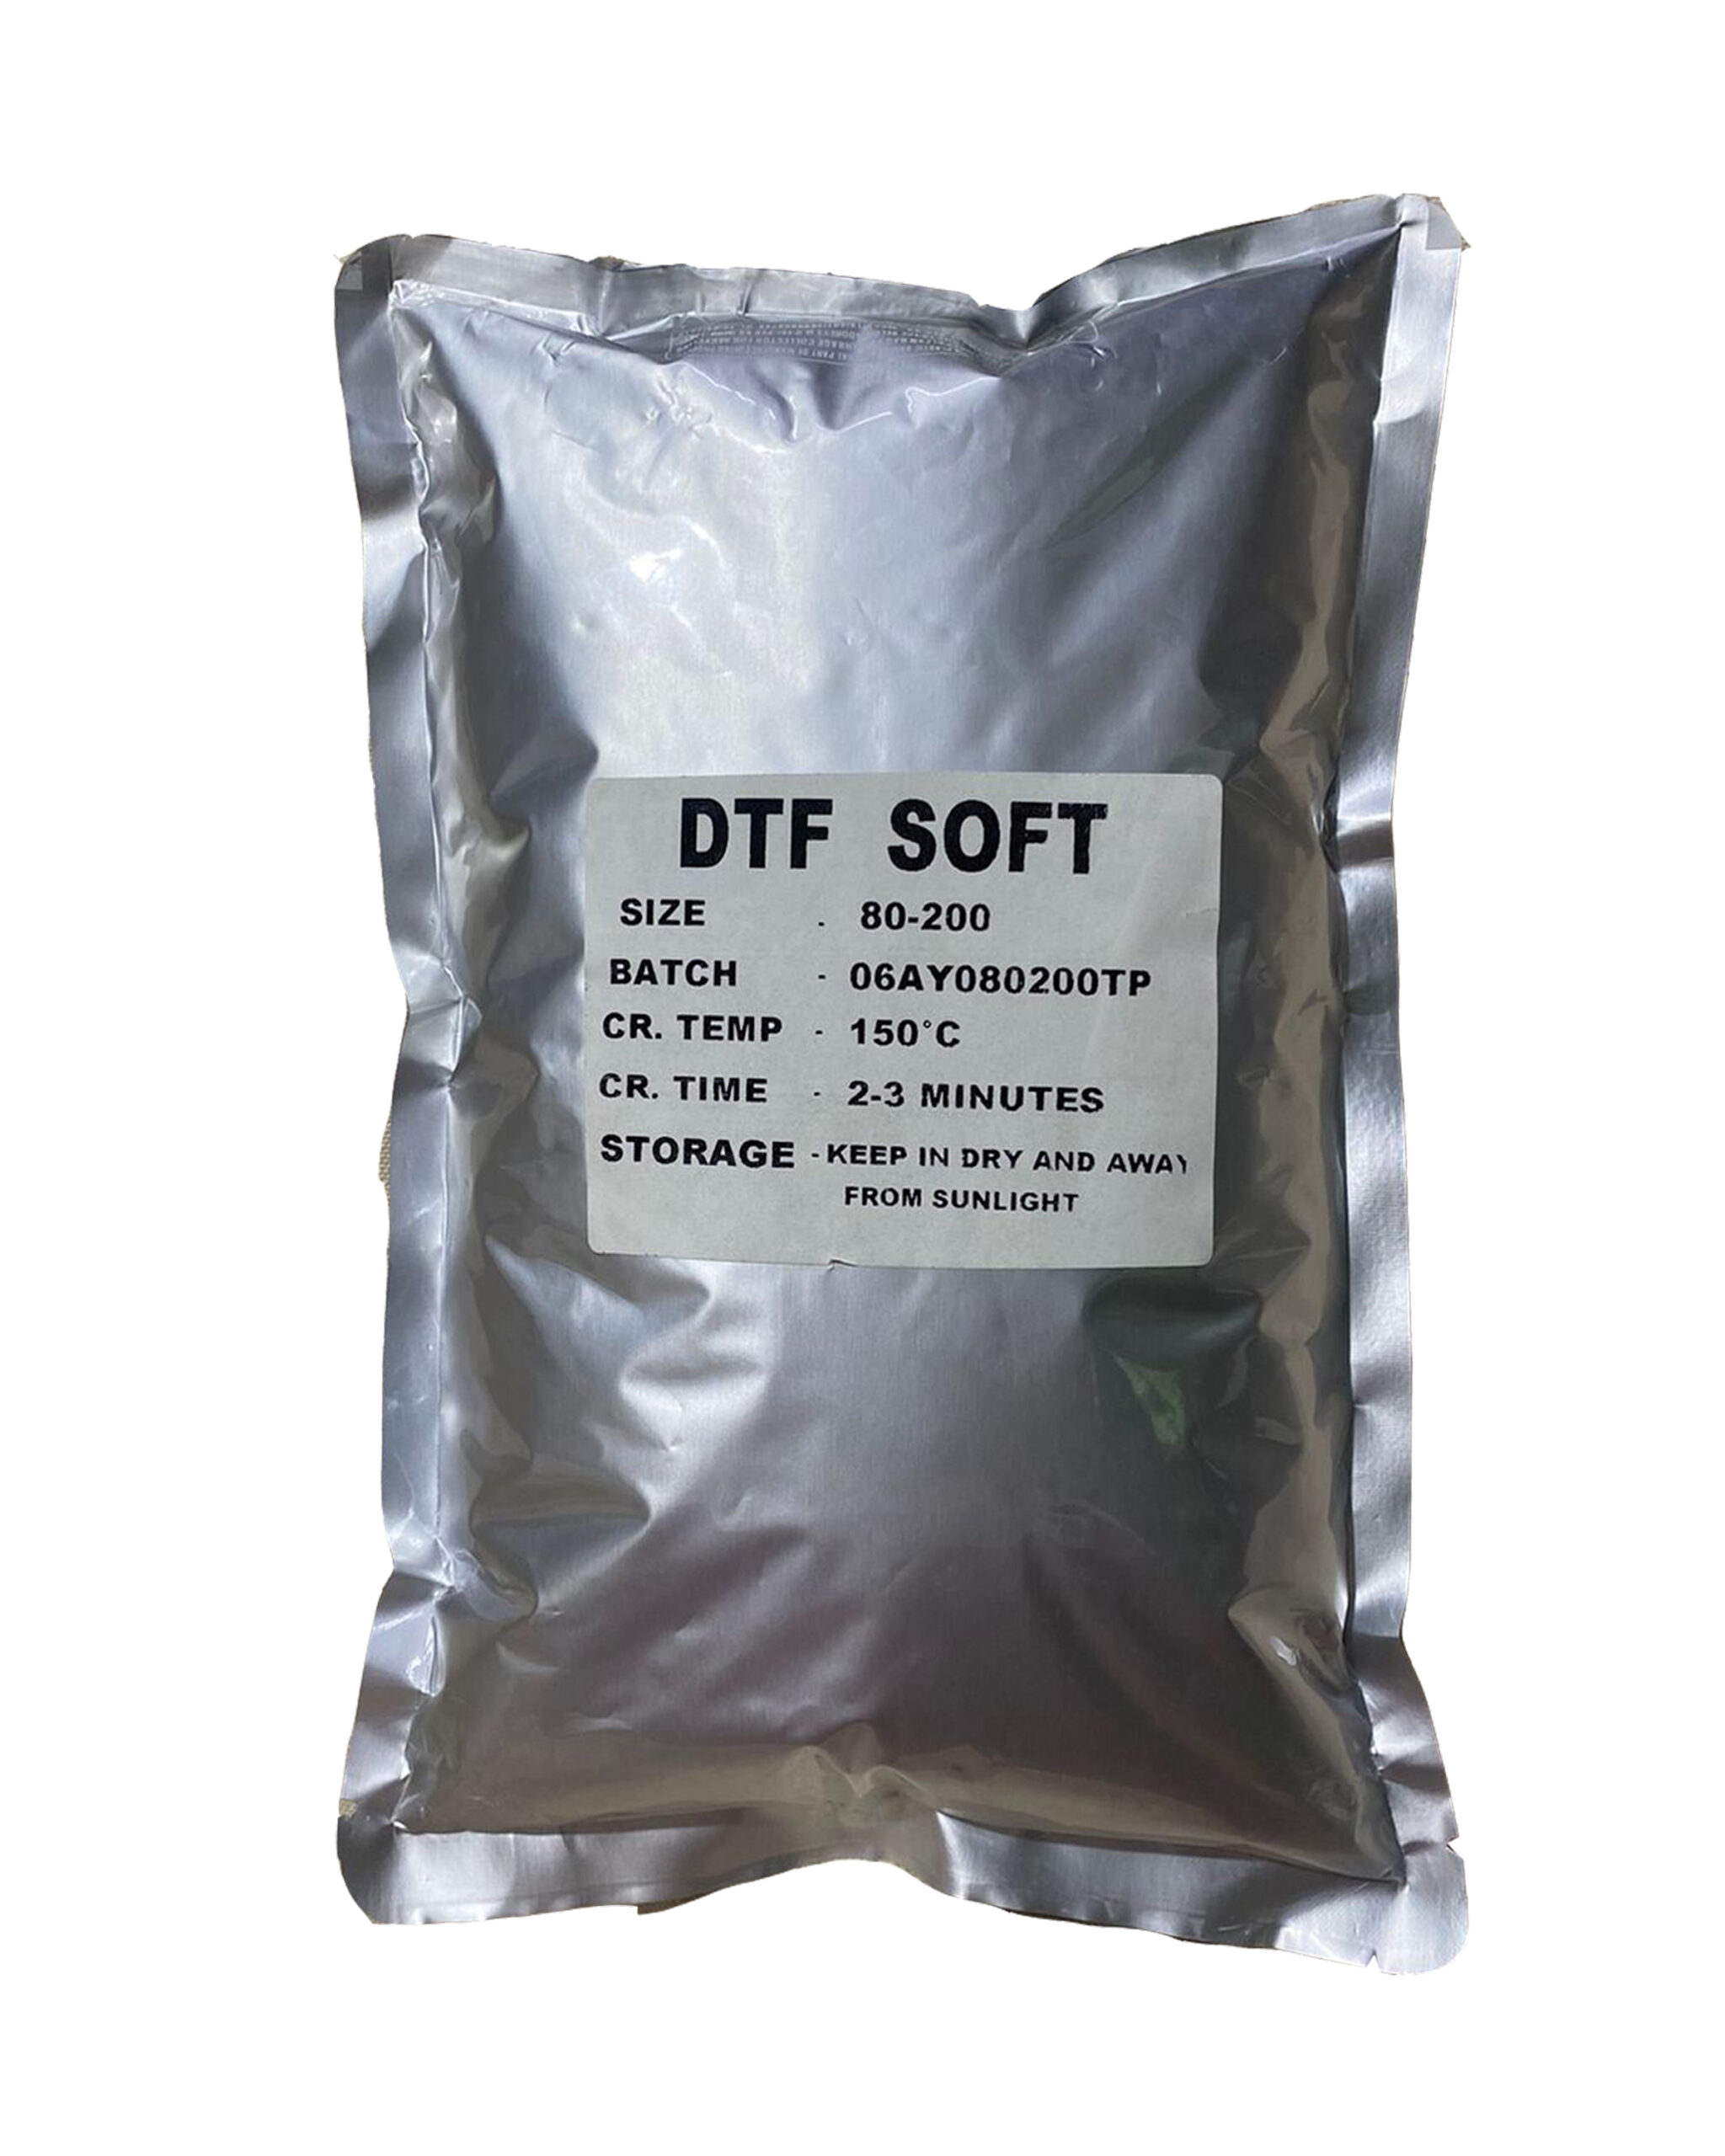 DTF Powder 01 scaled 1 IMPRINT SOLUTION We Imprint Solution Dealing With Printers, Inks, Papers https://imprintsolution.co.in/wp-content/uploads/2021/02/cropped-Imprint-logo-01-1.png ₹1299